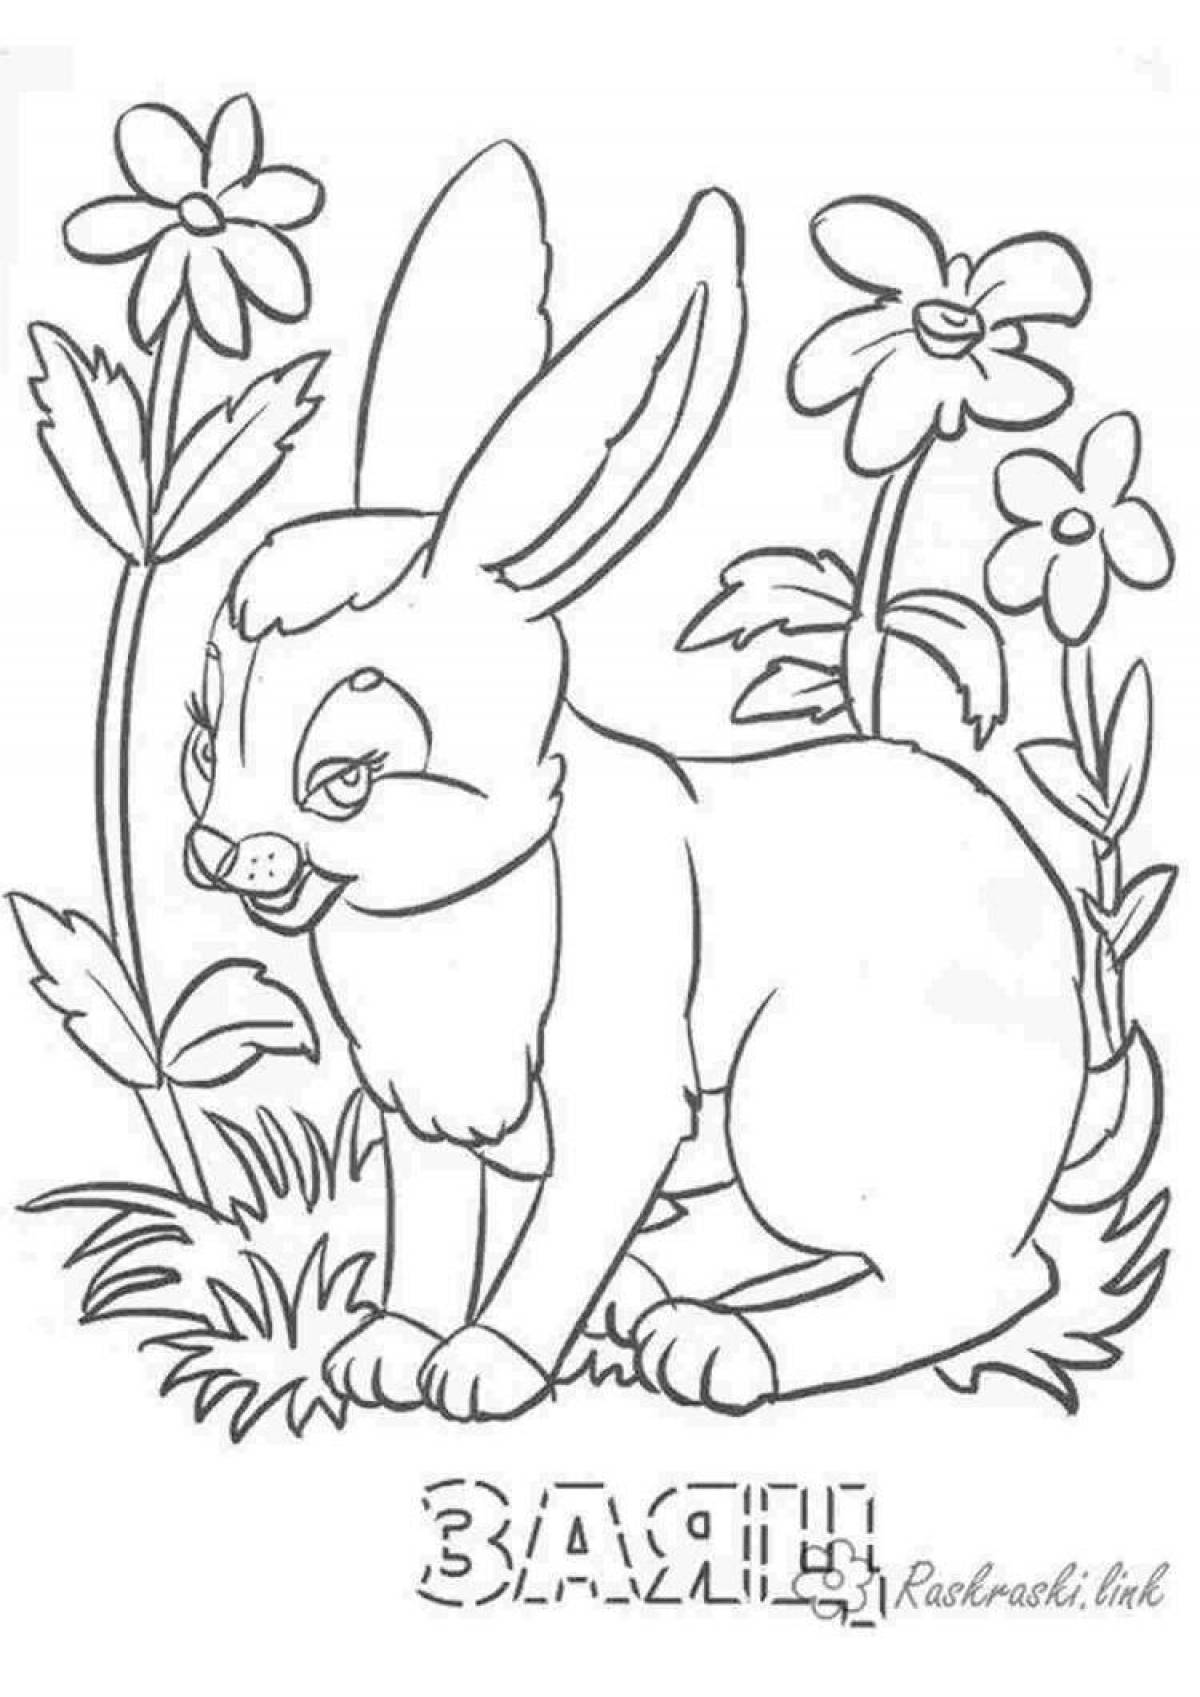 Amazing forest animal coloring pages for 4-5 year olds